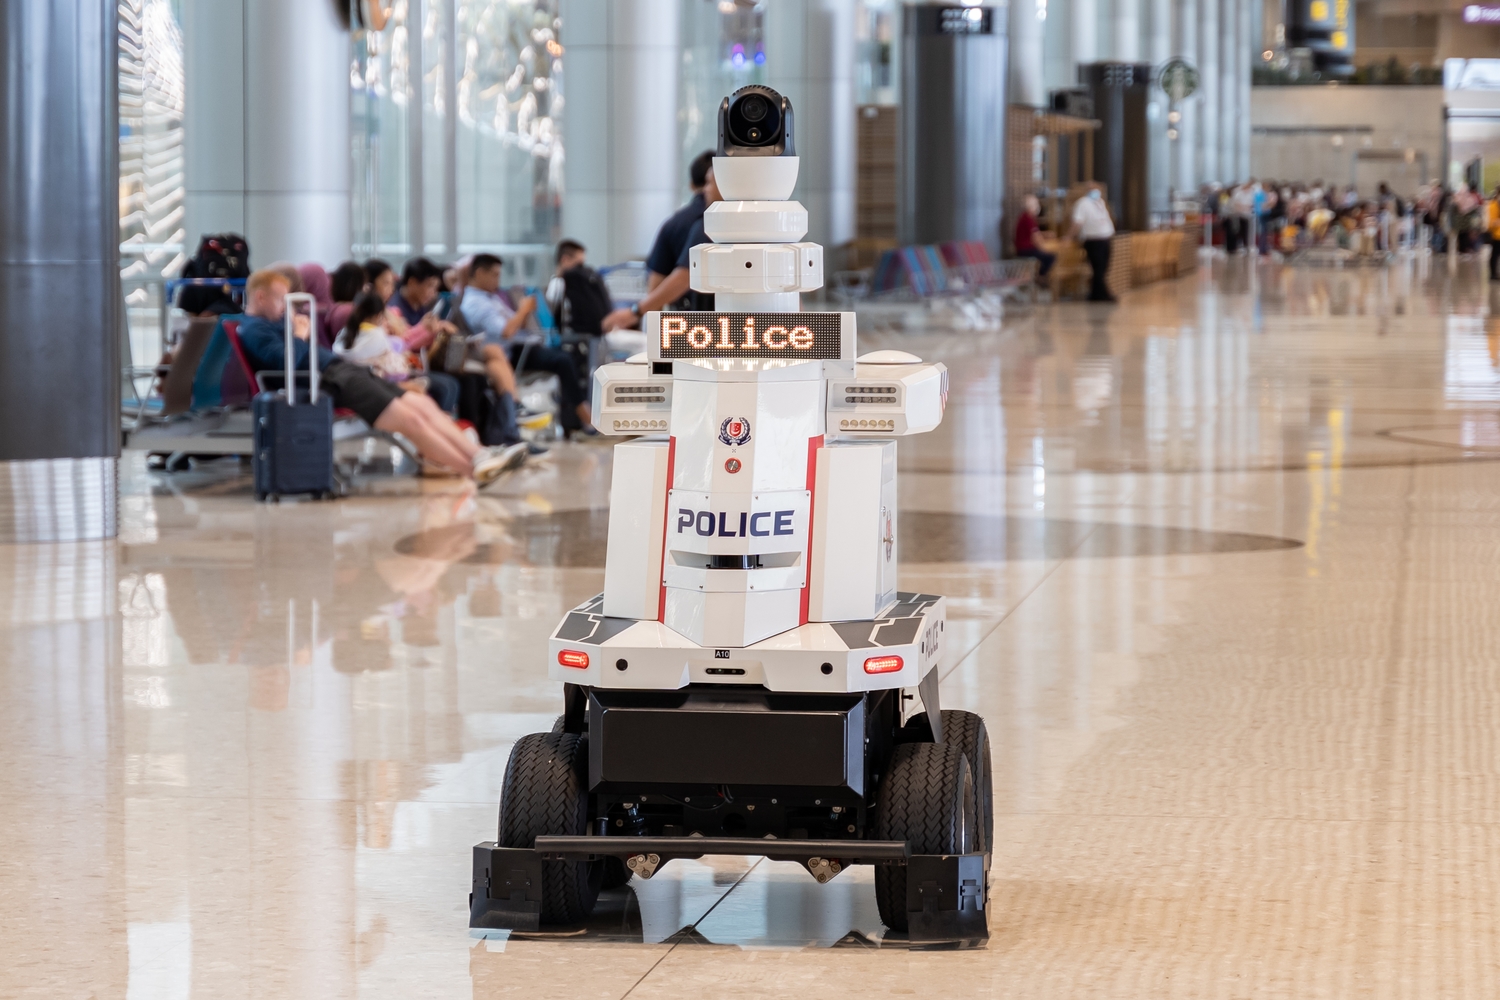 A full view of The SPF's Patrol Robot.